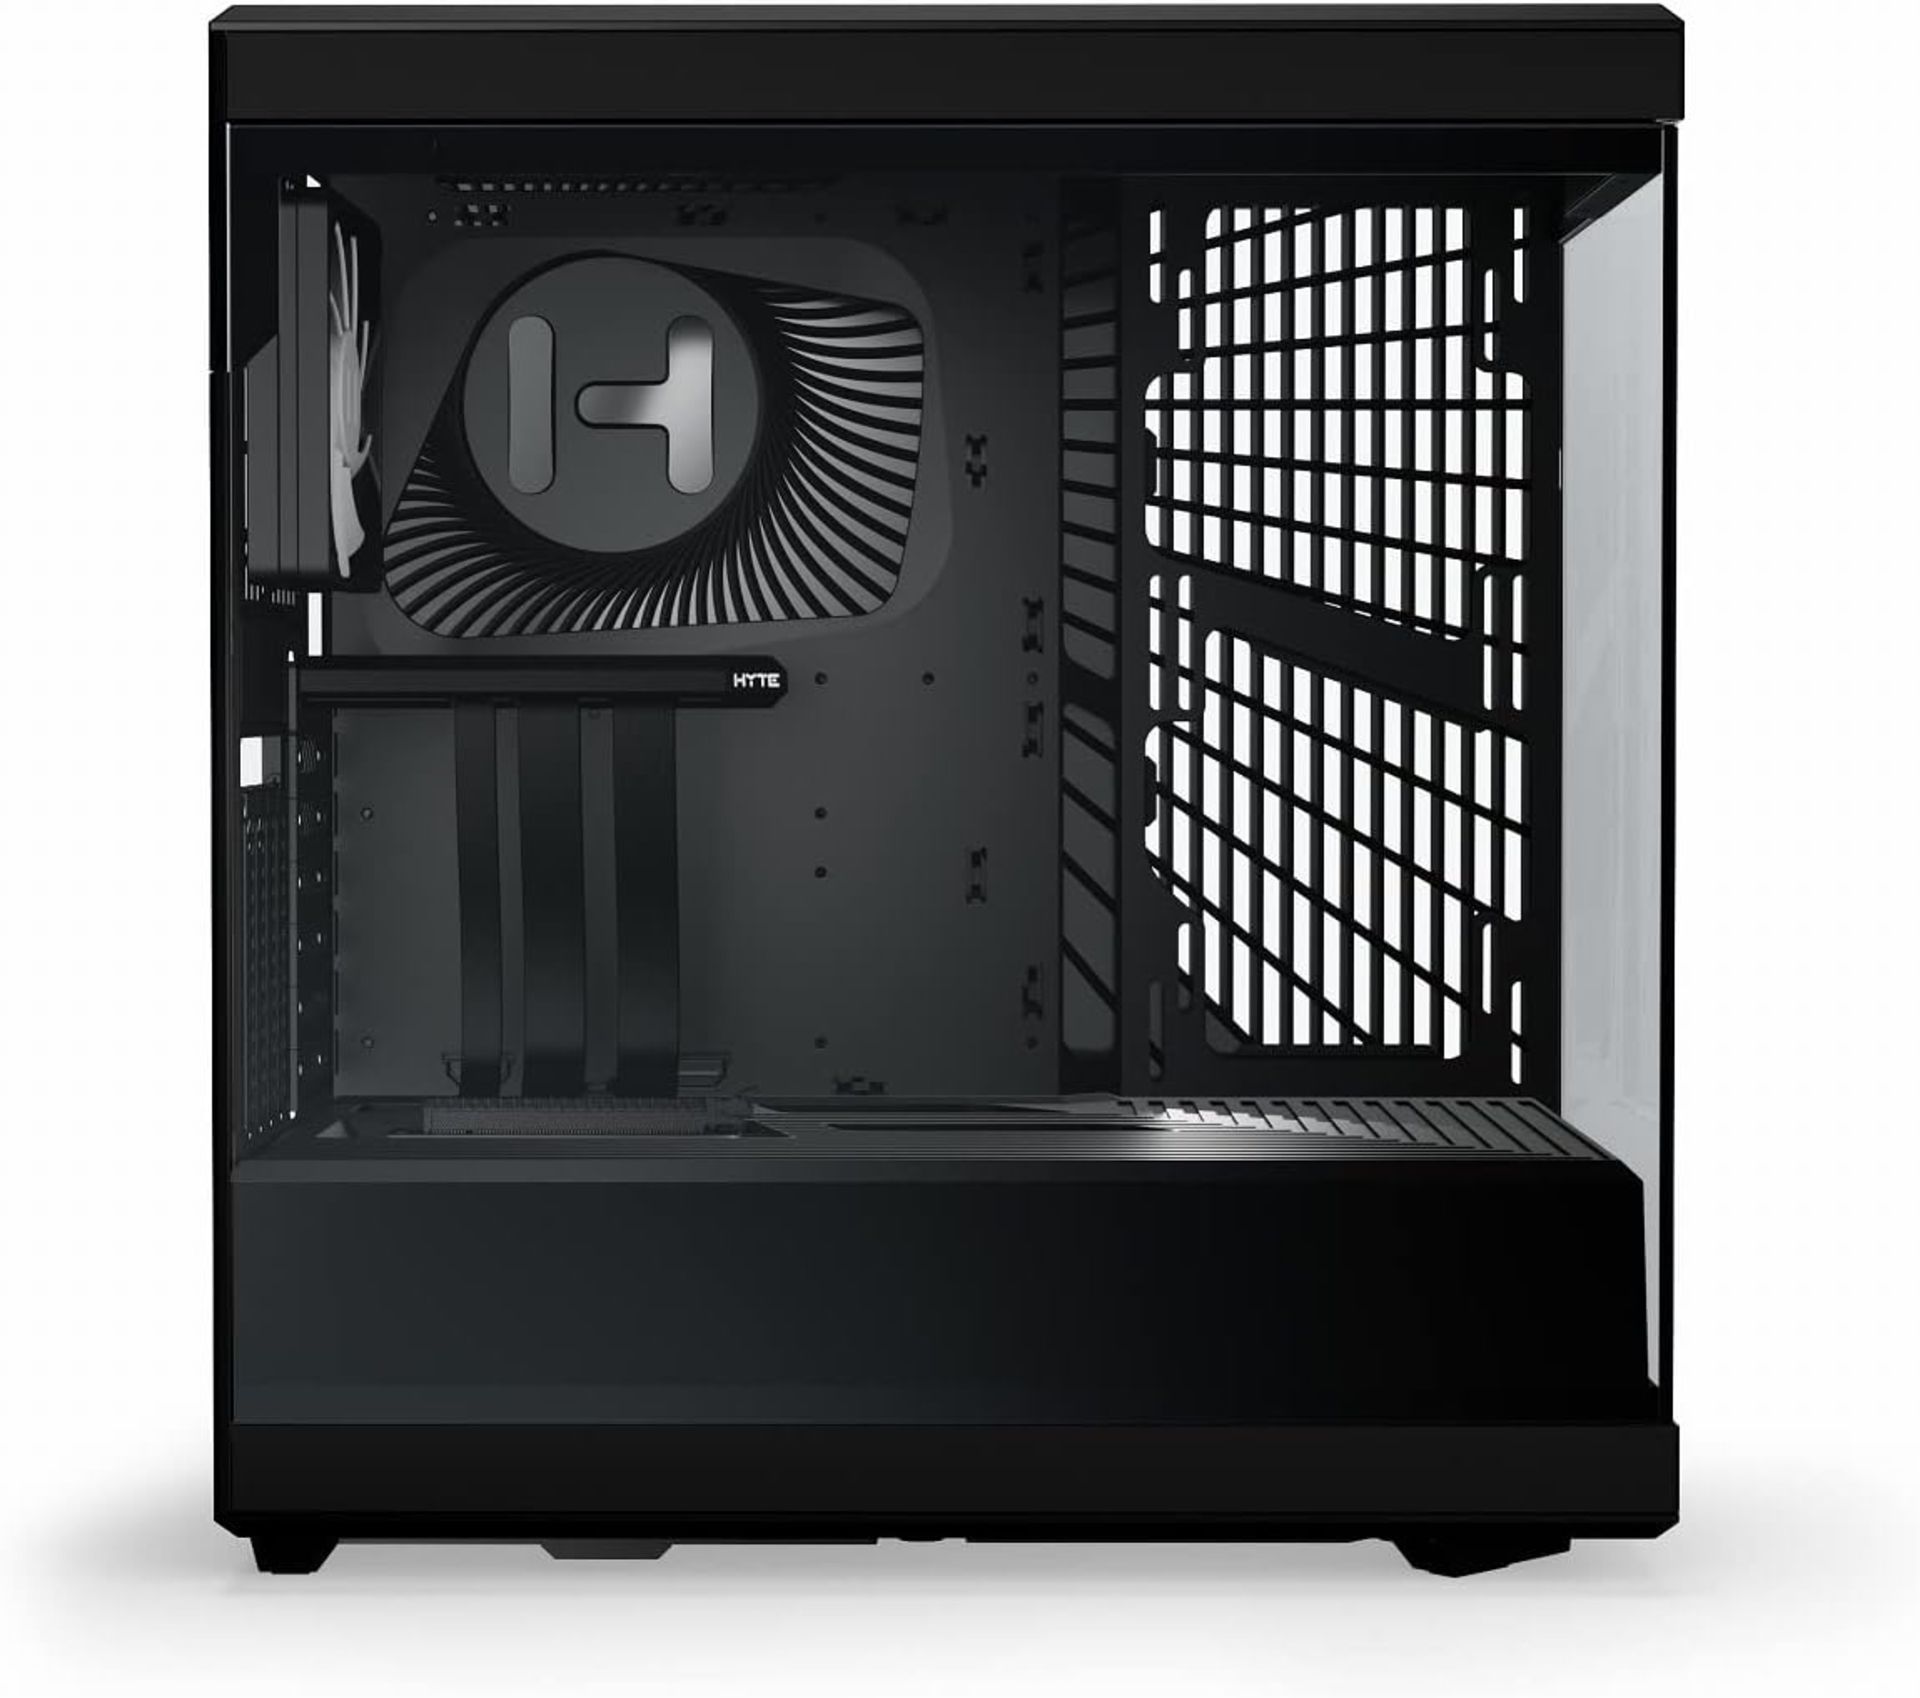 NEW & BOXED HYTE Y40 Mid-Tower ATX Case - Black. RRP £159.98. (R15R). The HYTE Y40 Mid-Tower ATX - Bild 4 aus 5